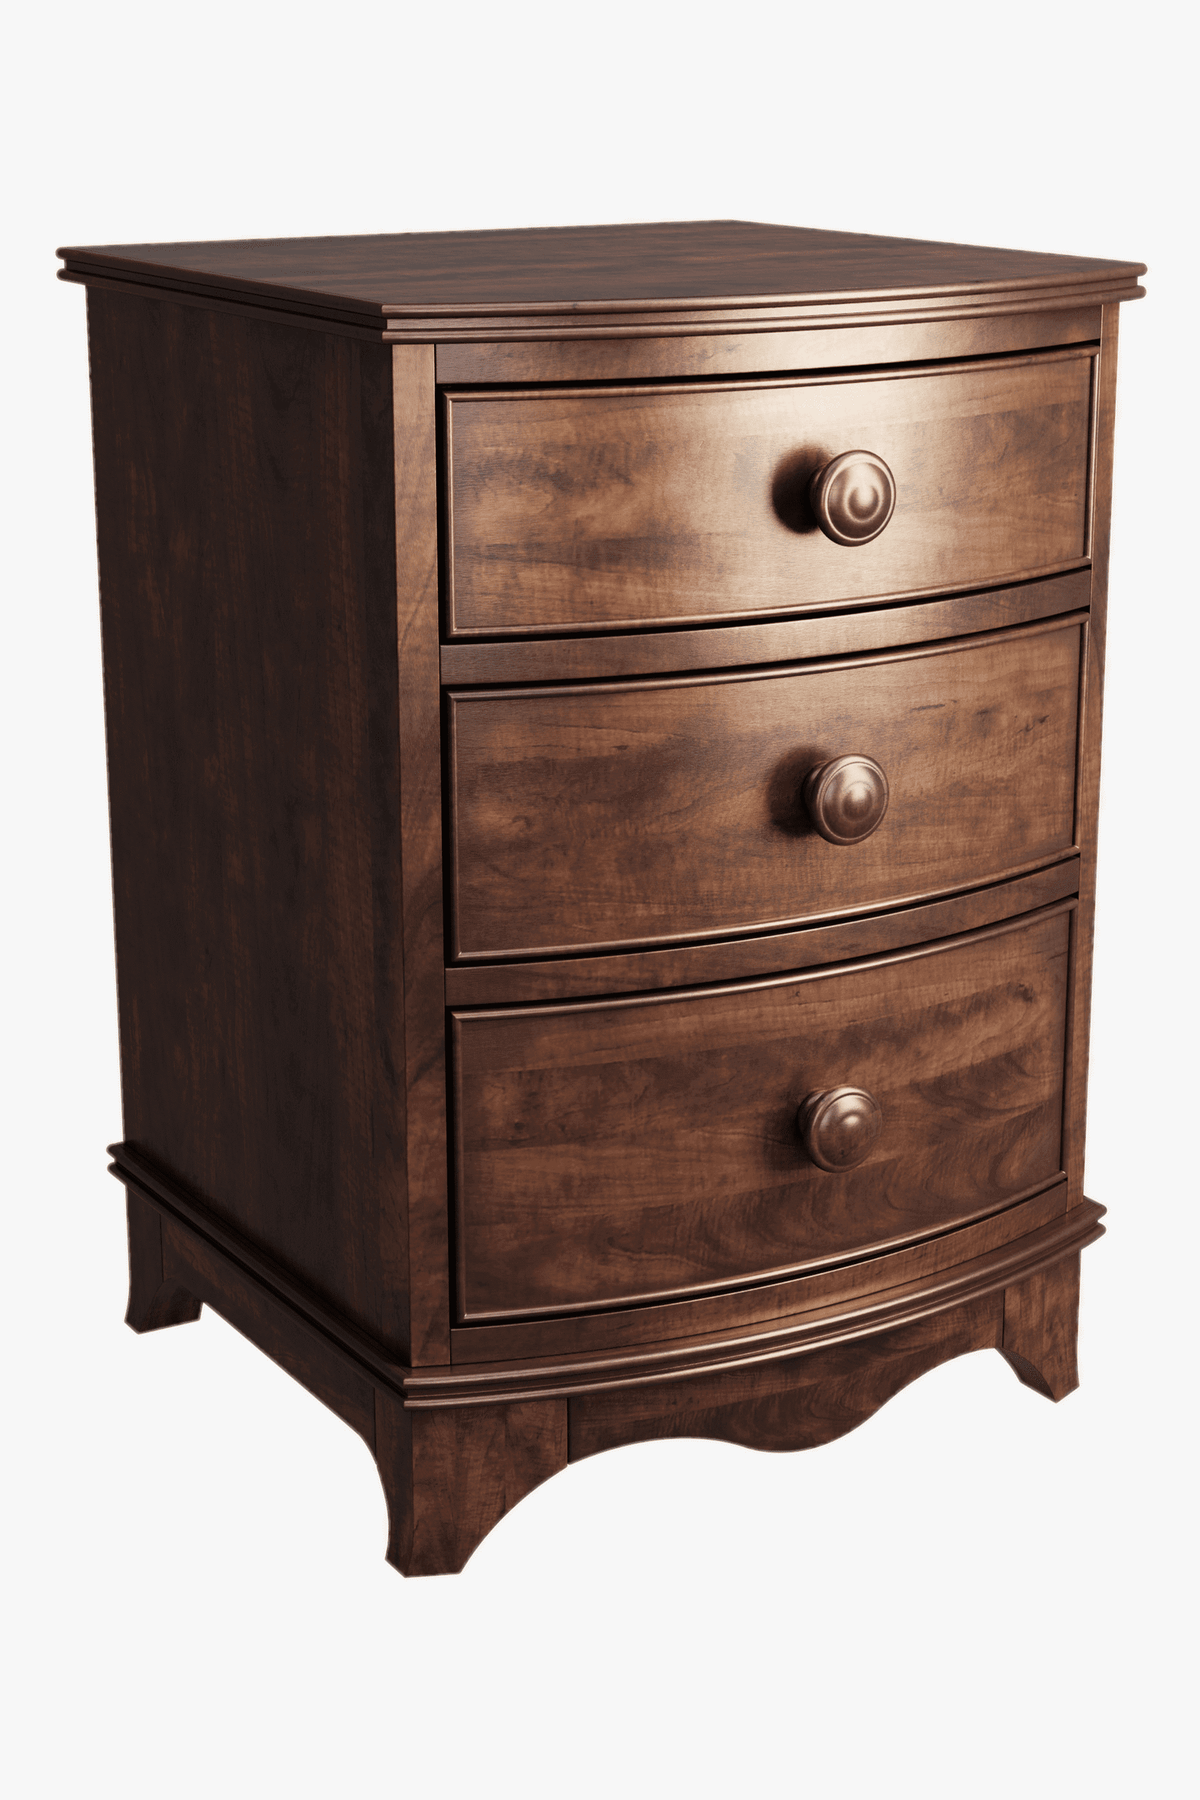 Broughton 3 Drawer Bedside Table